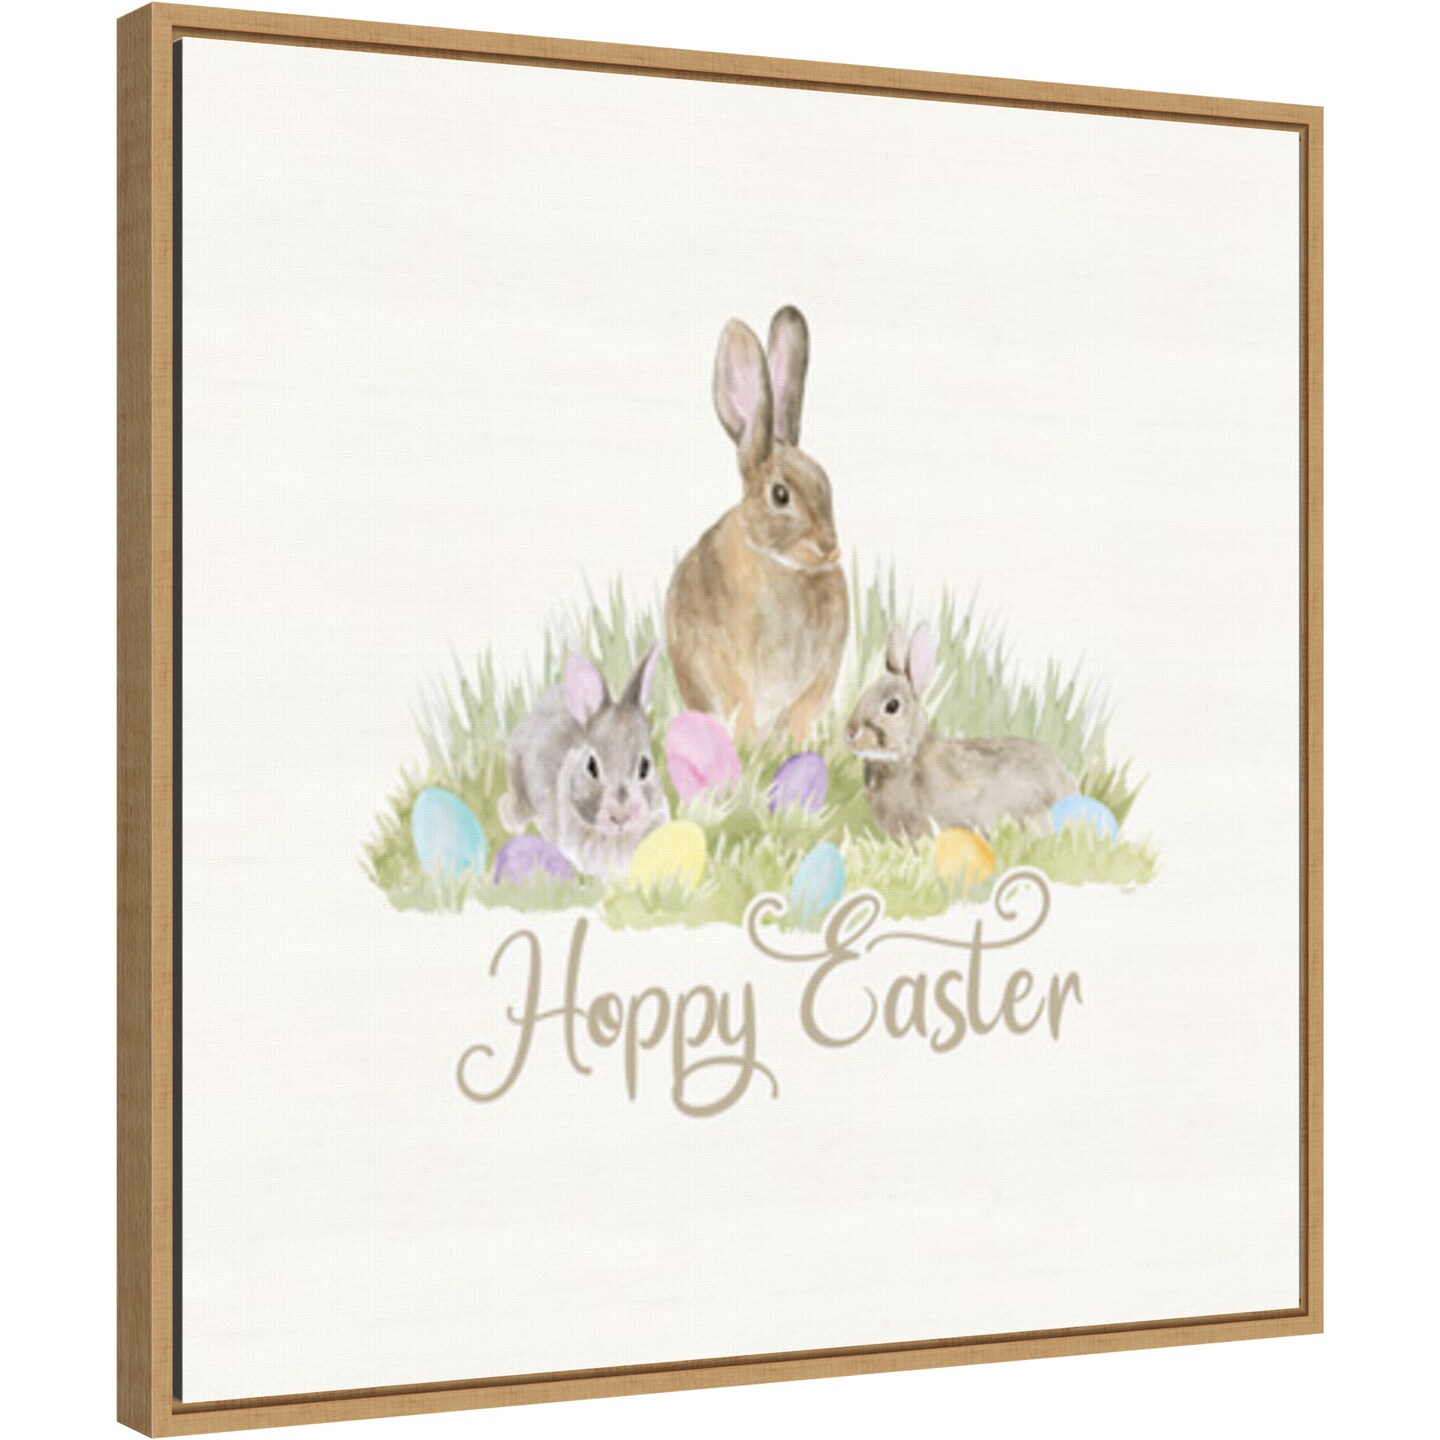 Farmhouse Easter VI Bunny by Tara Reed 22-in. W x 22-in. H. Canvas Wall Art Print Framed in Natural